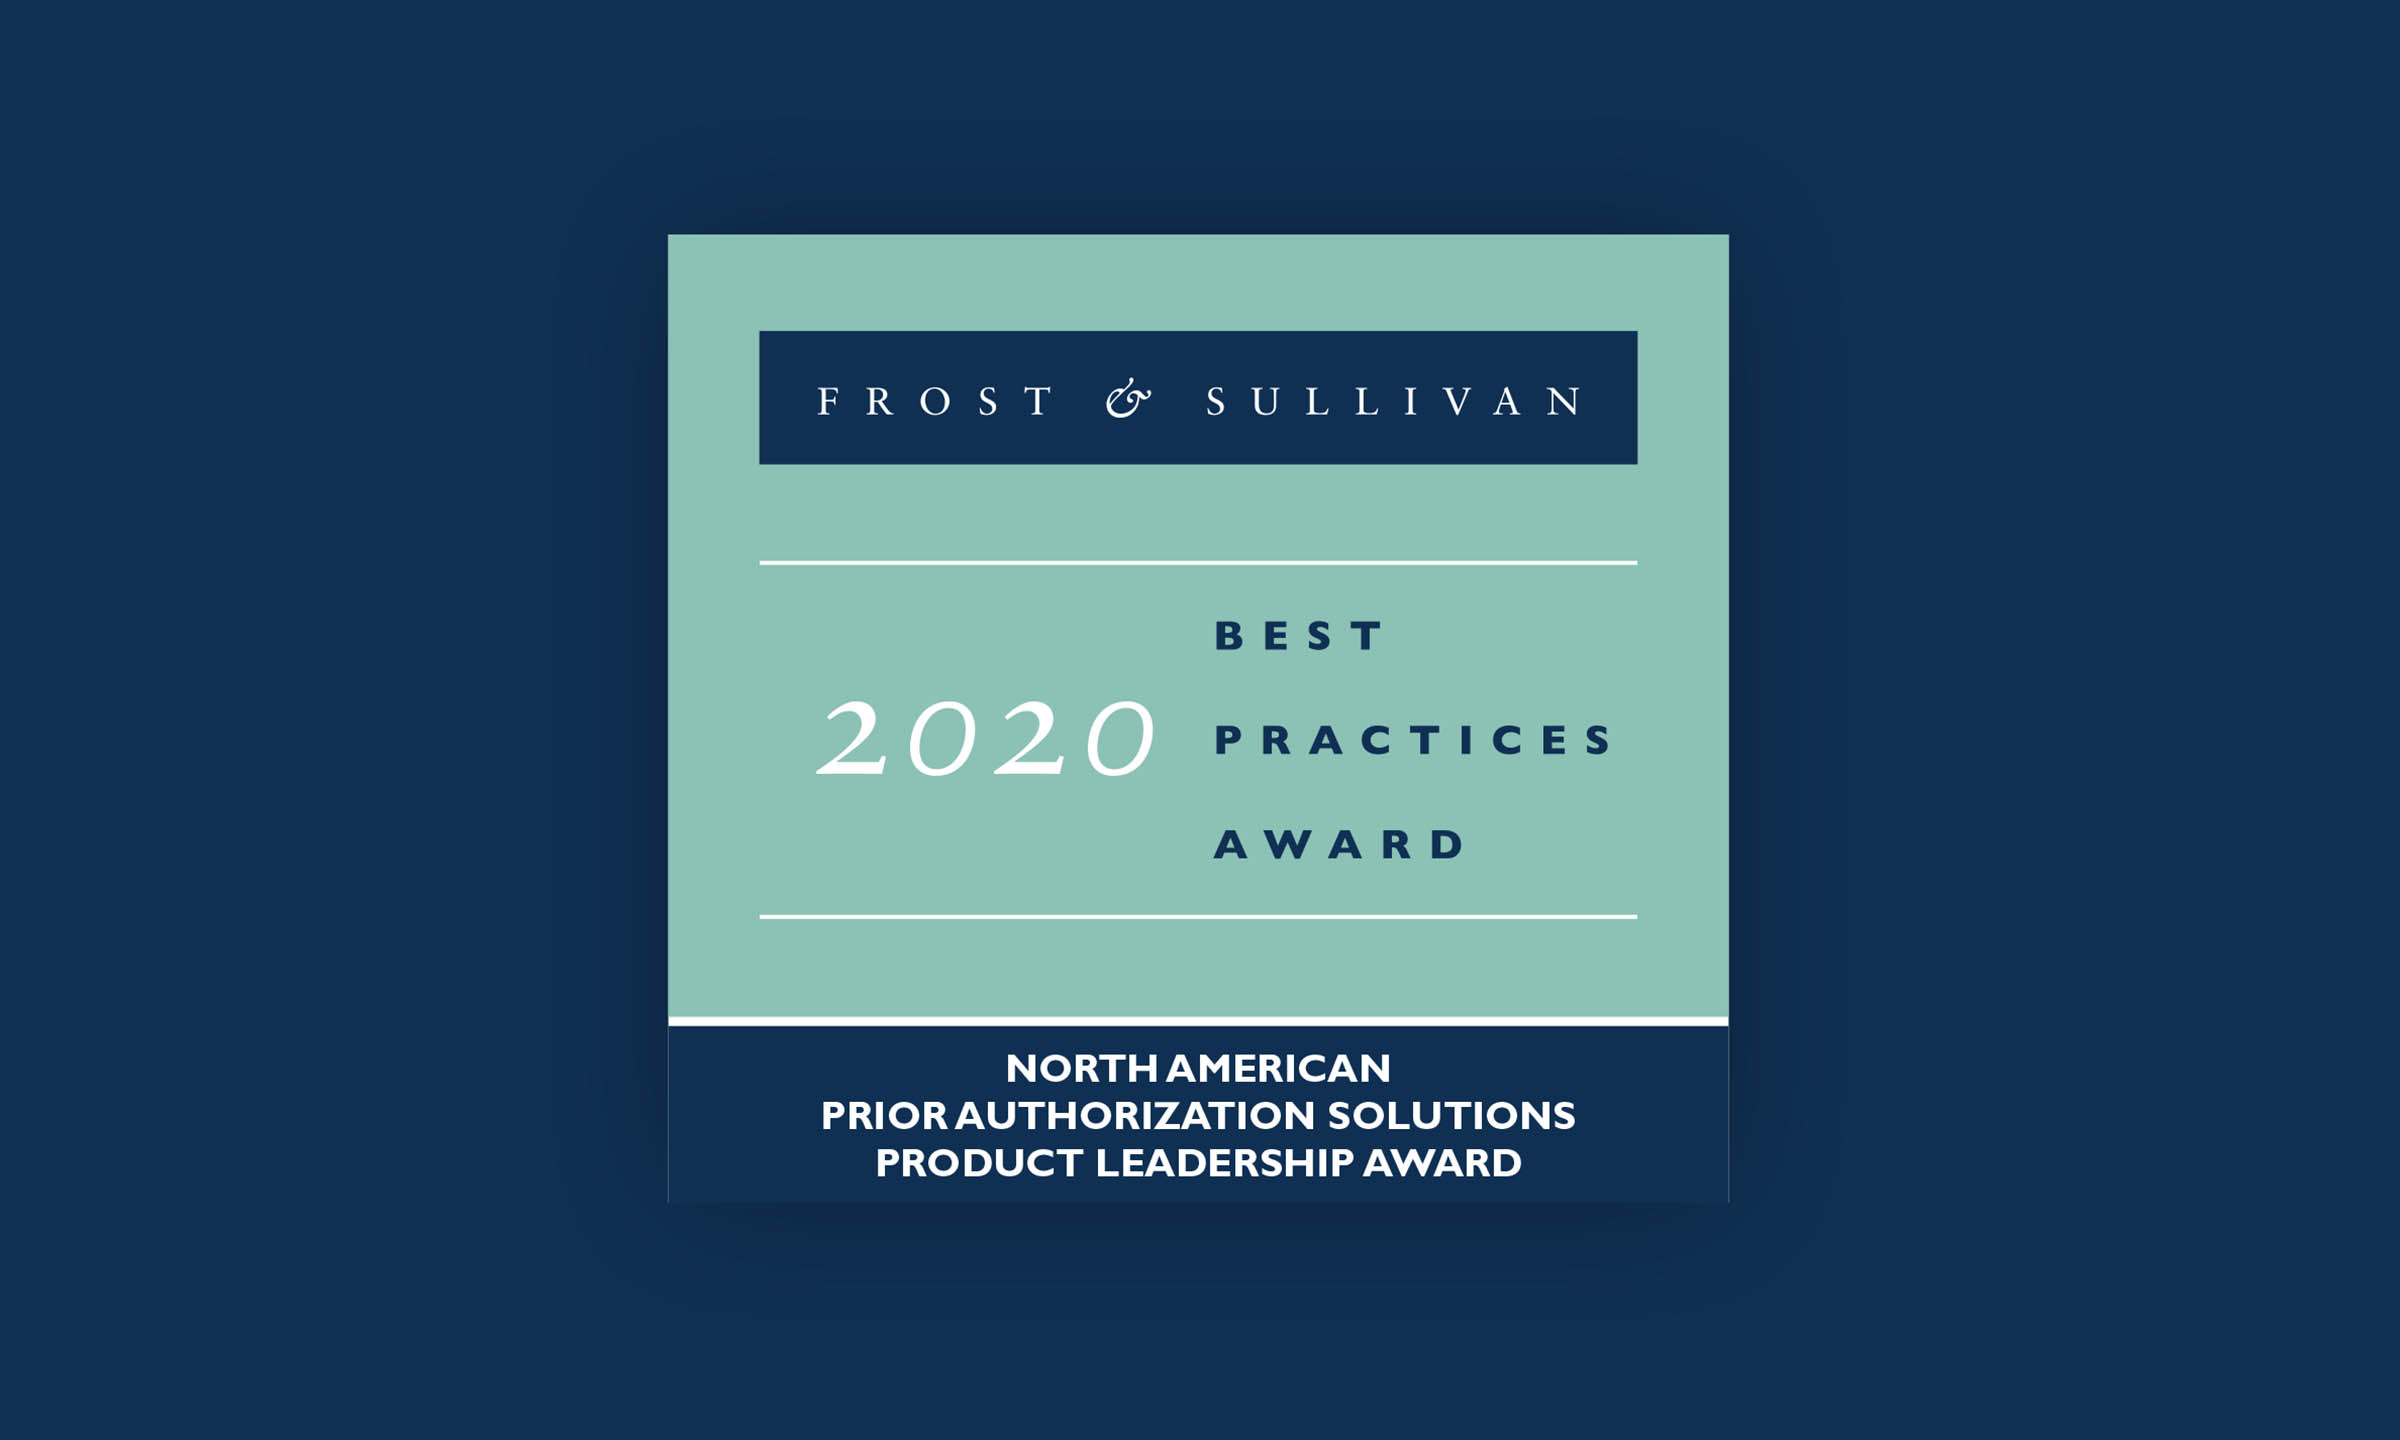 CoverMyMeds Receives Frost & Sullivan 2020 Product Leadership Award